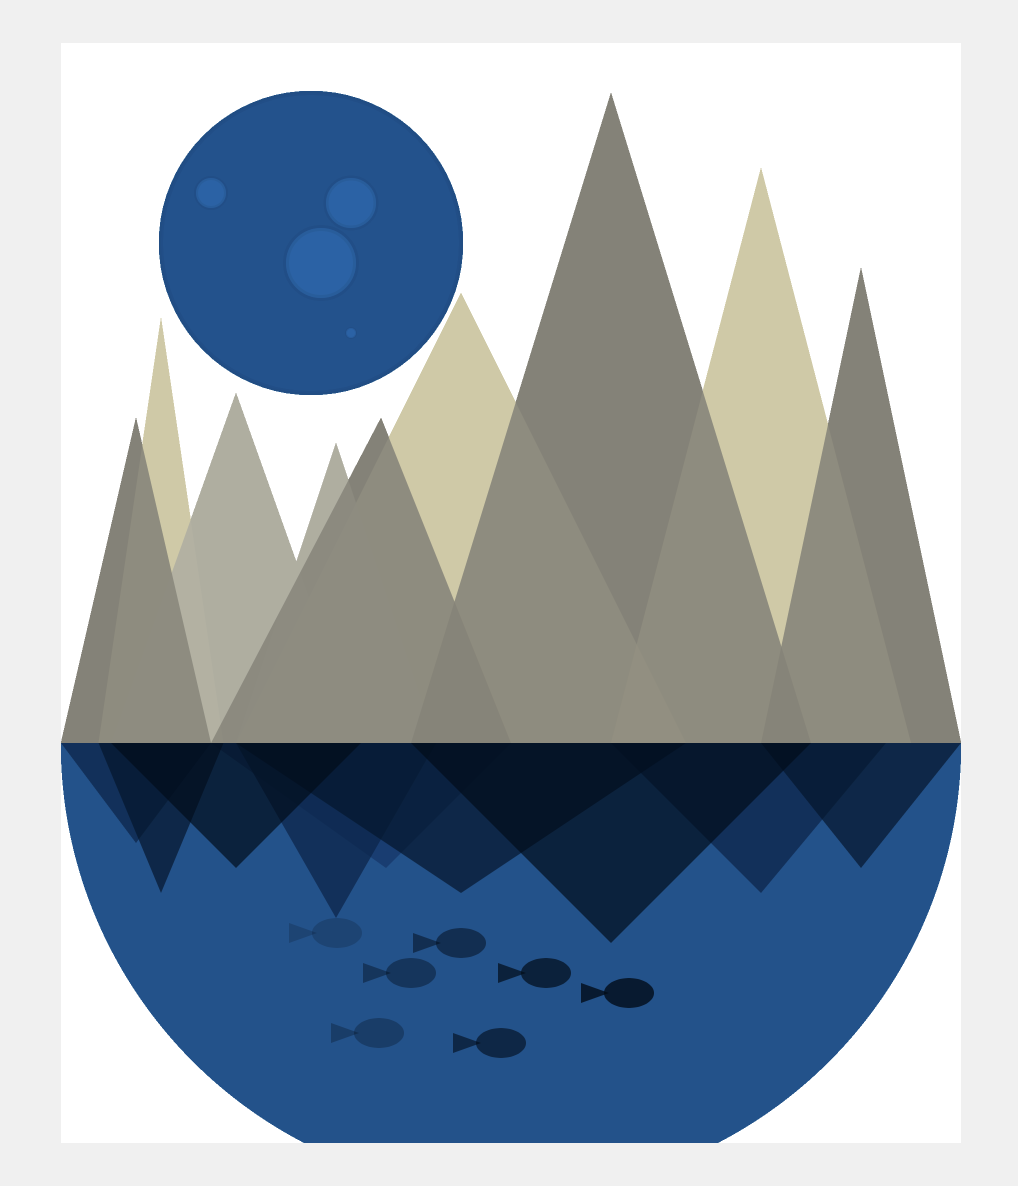 Semicircular blue pond with fish, with mountains on top of it and reflected in it, and a blue full moon above the mountains on a white background.